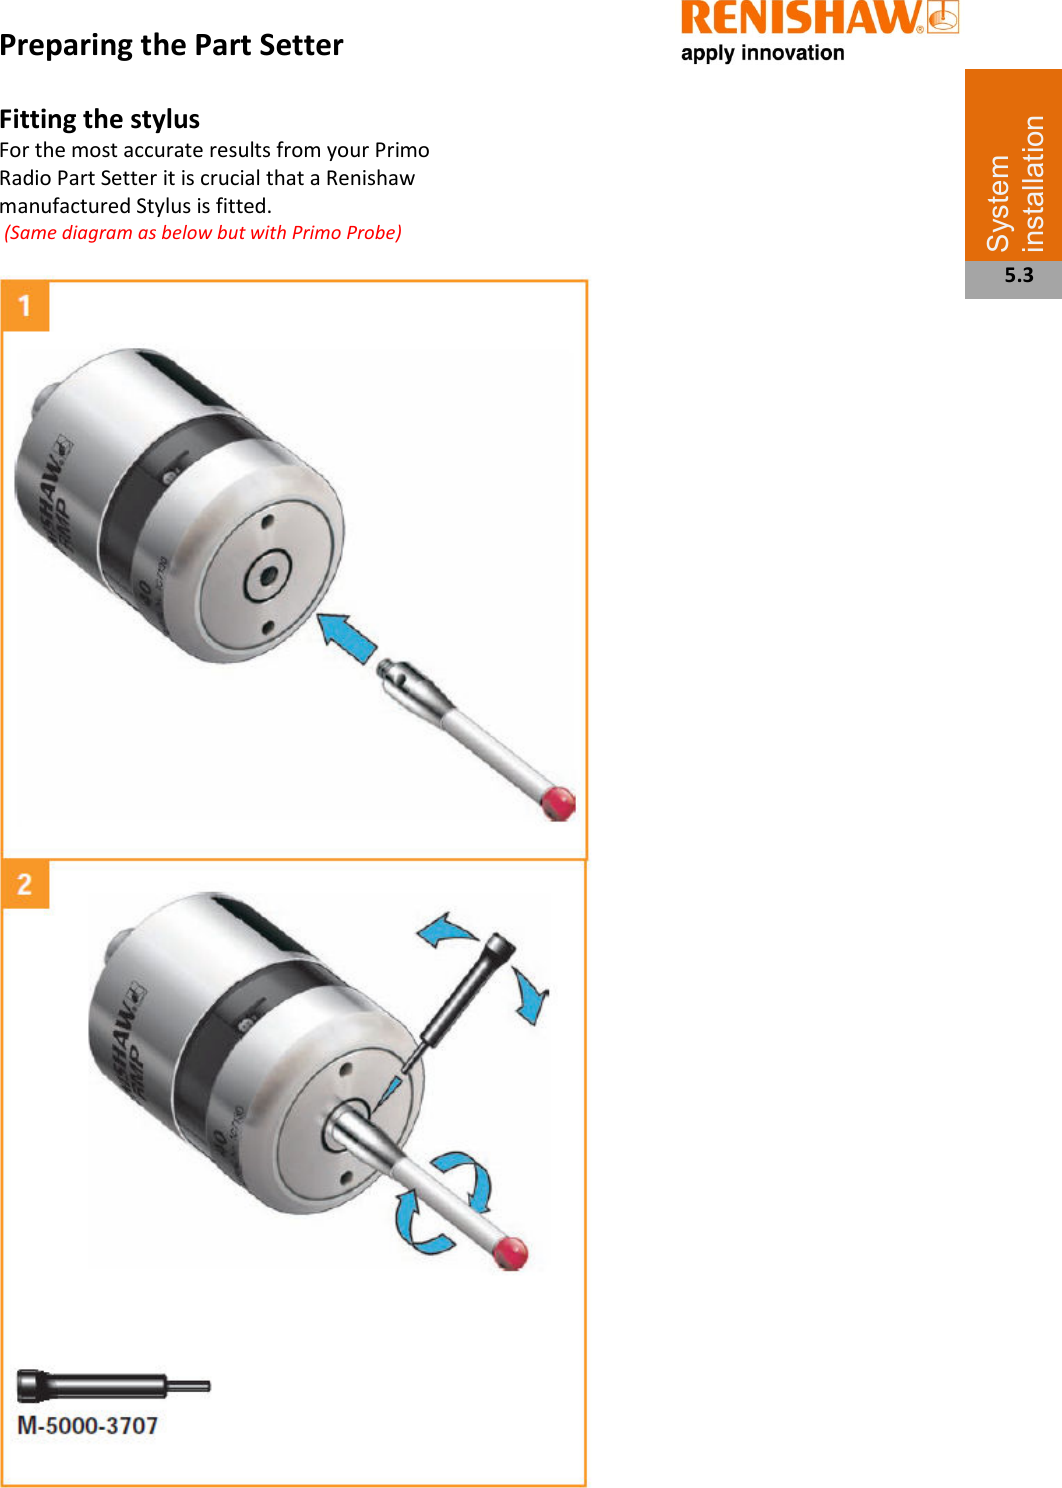   Preparing the Part Setter  Fitting the stylus For the most accurate results from your Primo Radio Part Setter it is crucial that a Renishaw manufactured Stylus is fitted.  (Same diagram as below but with Primo Probe)                                                          System installation  5.3 